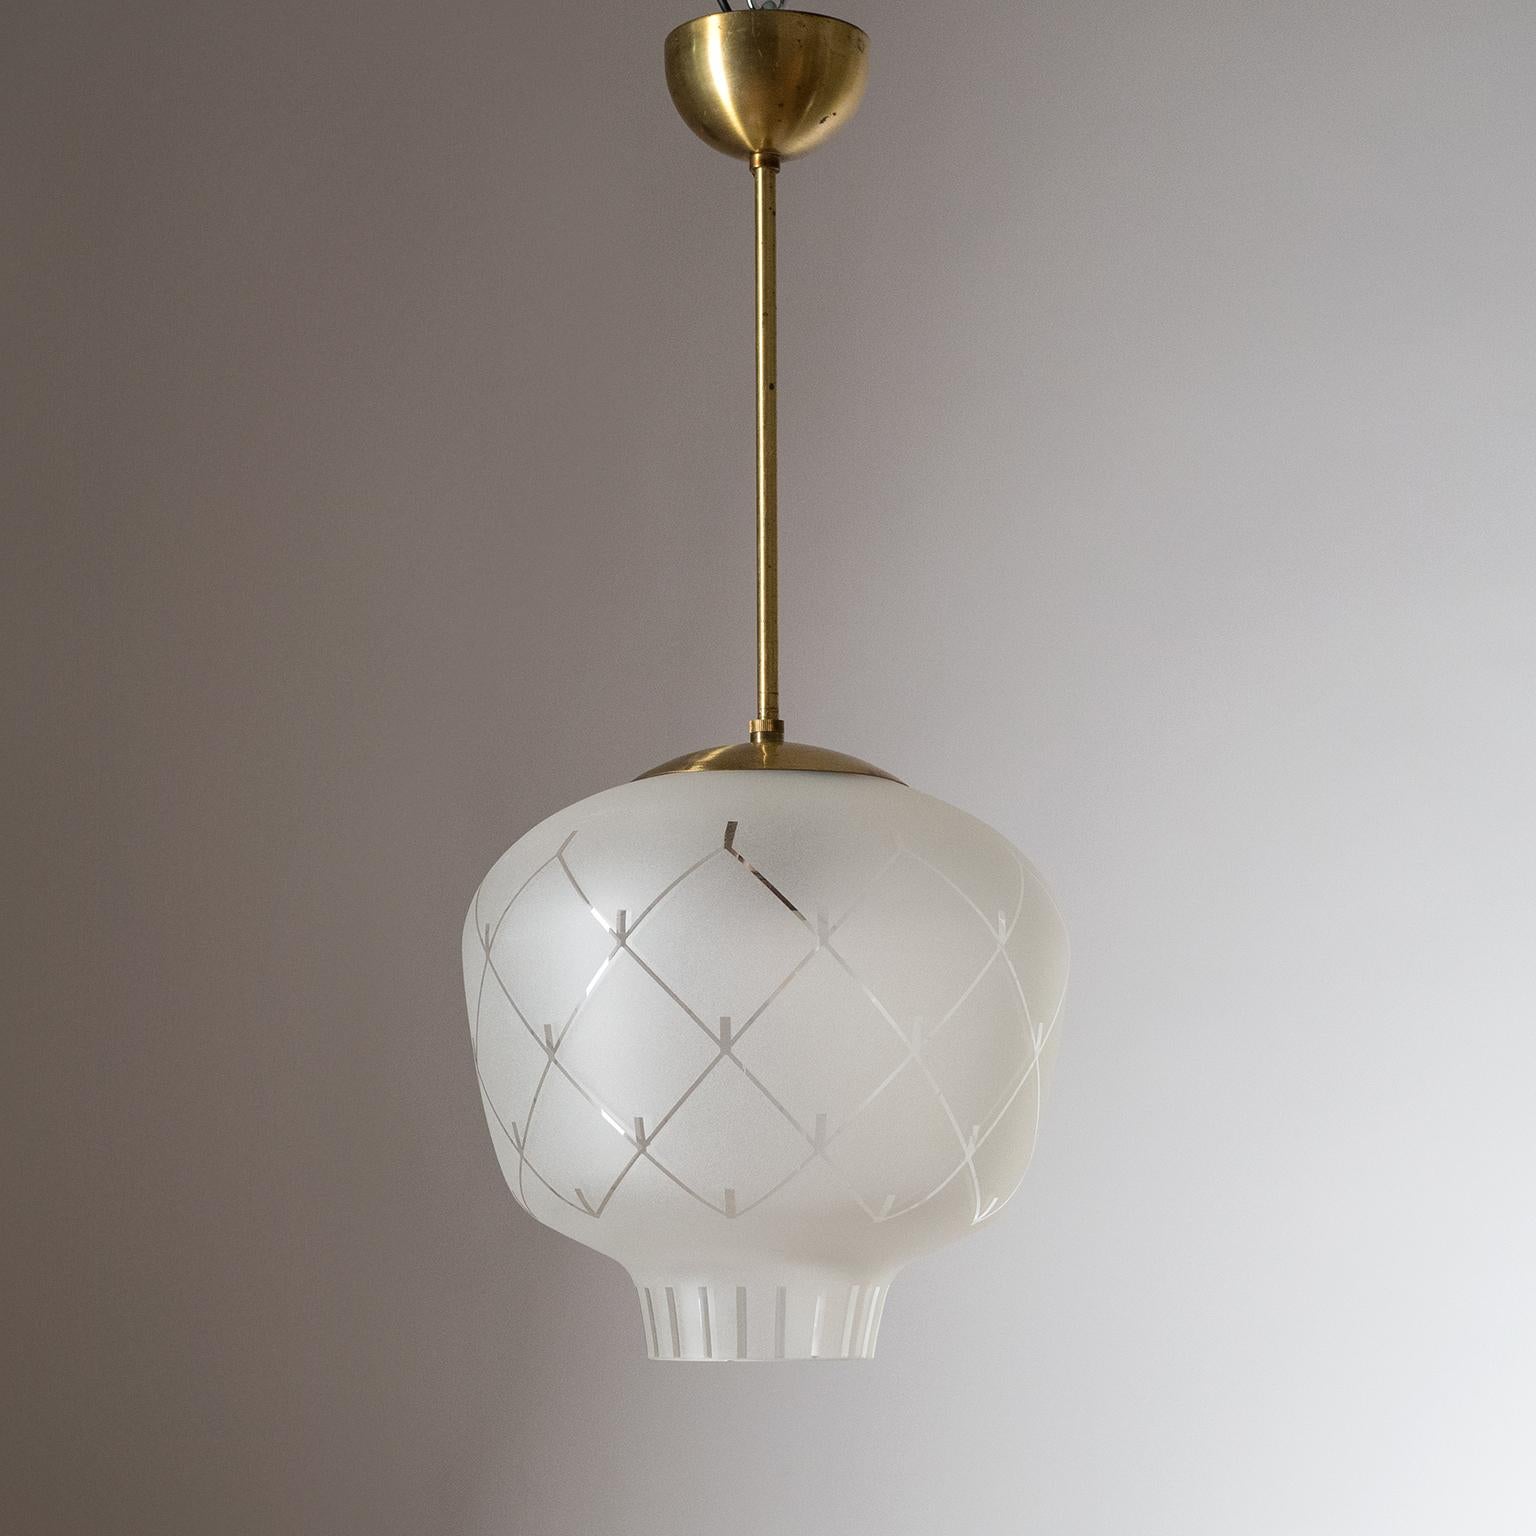 Swedish glass and brass pendant, late Art Deco, 1940s. A lovely shaped blown glass diffuser with a frosted geometric pattern and satin brass hardware. Fine original condition with a light patina on the brass. One original brass E27 socket with new